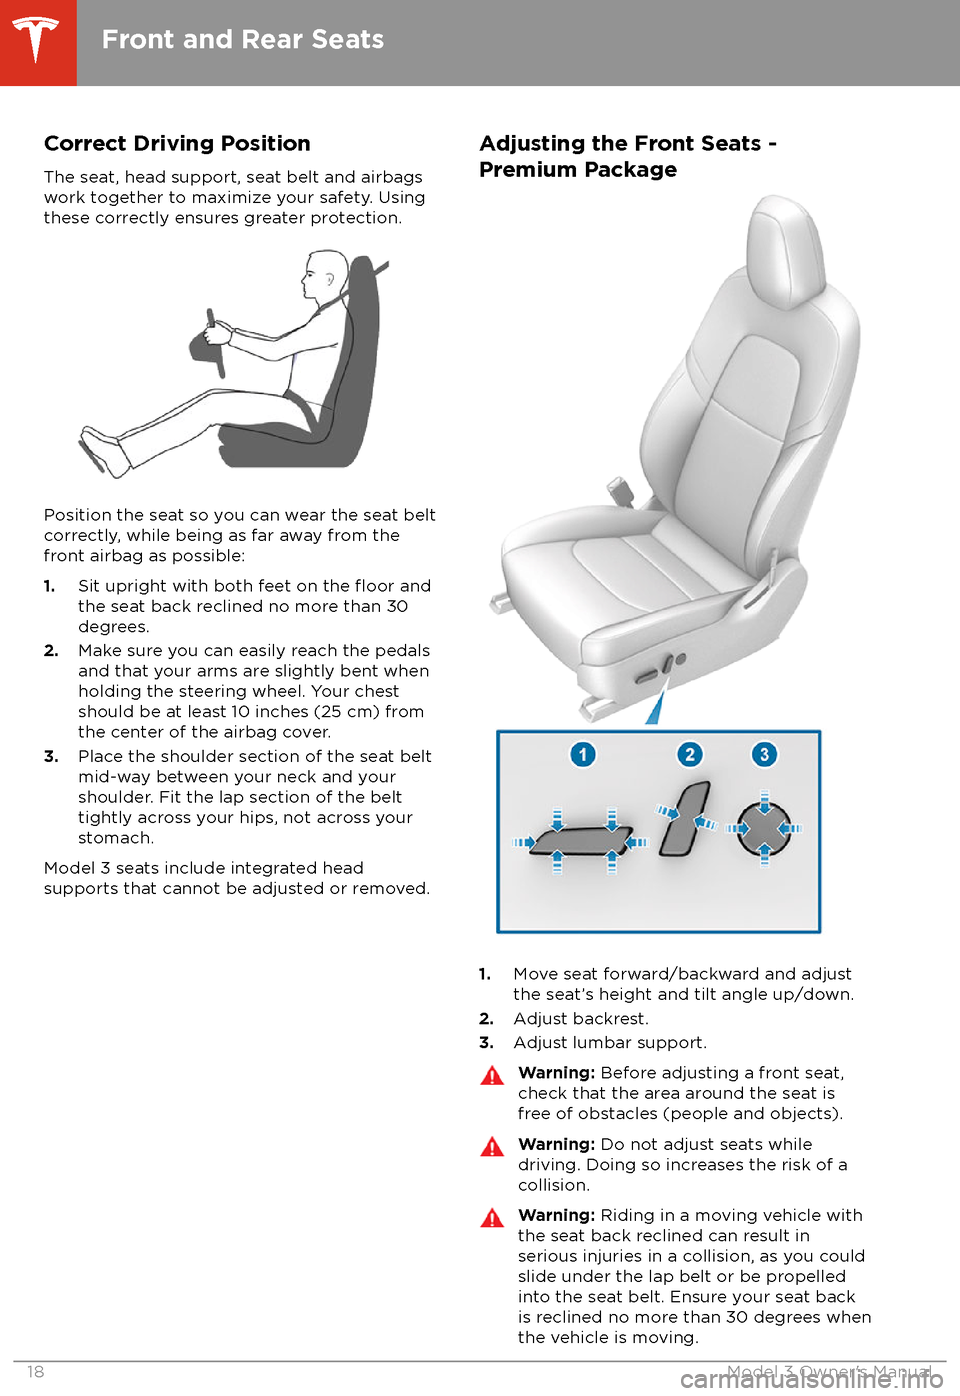 TESLA MODEL 3 2018  Owners Manual Correct Driving Position
The seat, head support, seat belt and airbags
work together to maximize your safety. Using
these correctly ensures greater protection.
Position the seat so you can wear the se